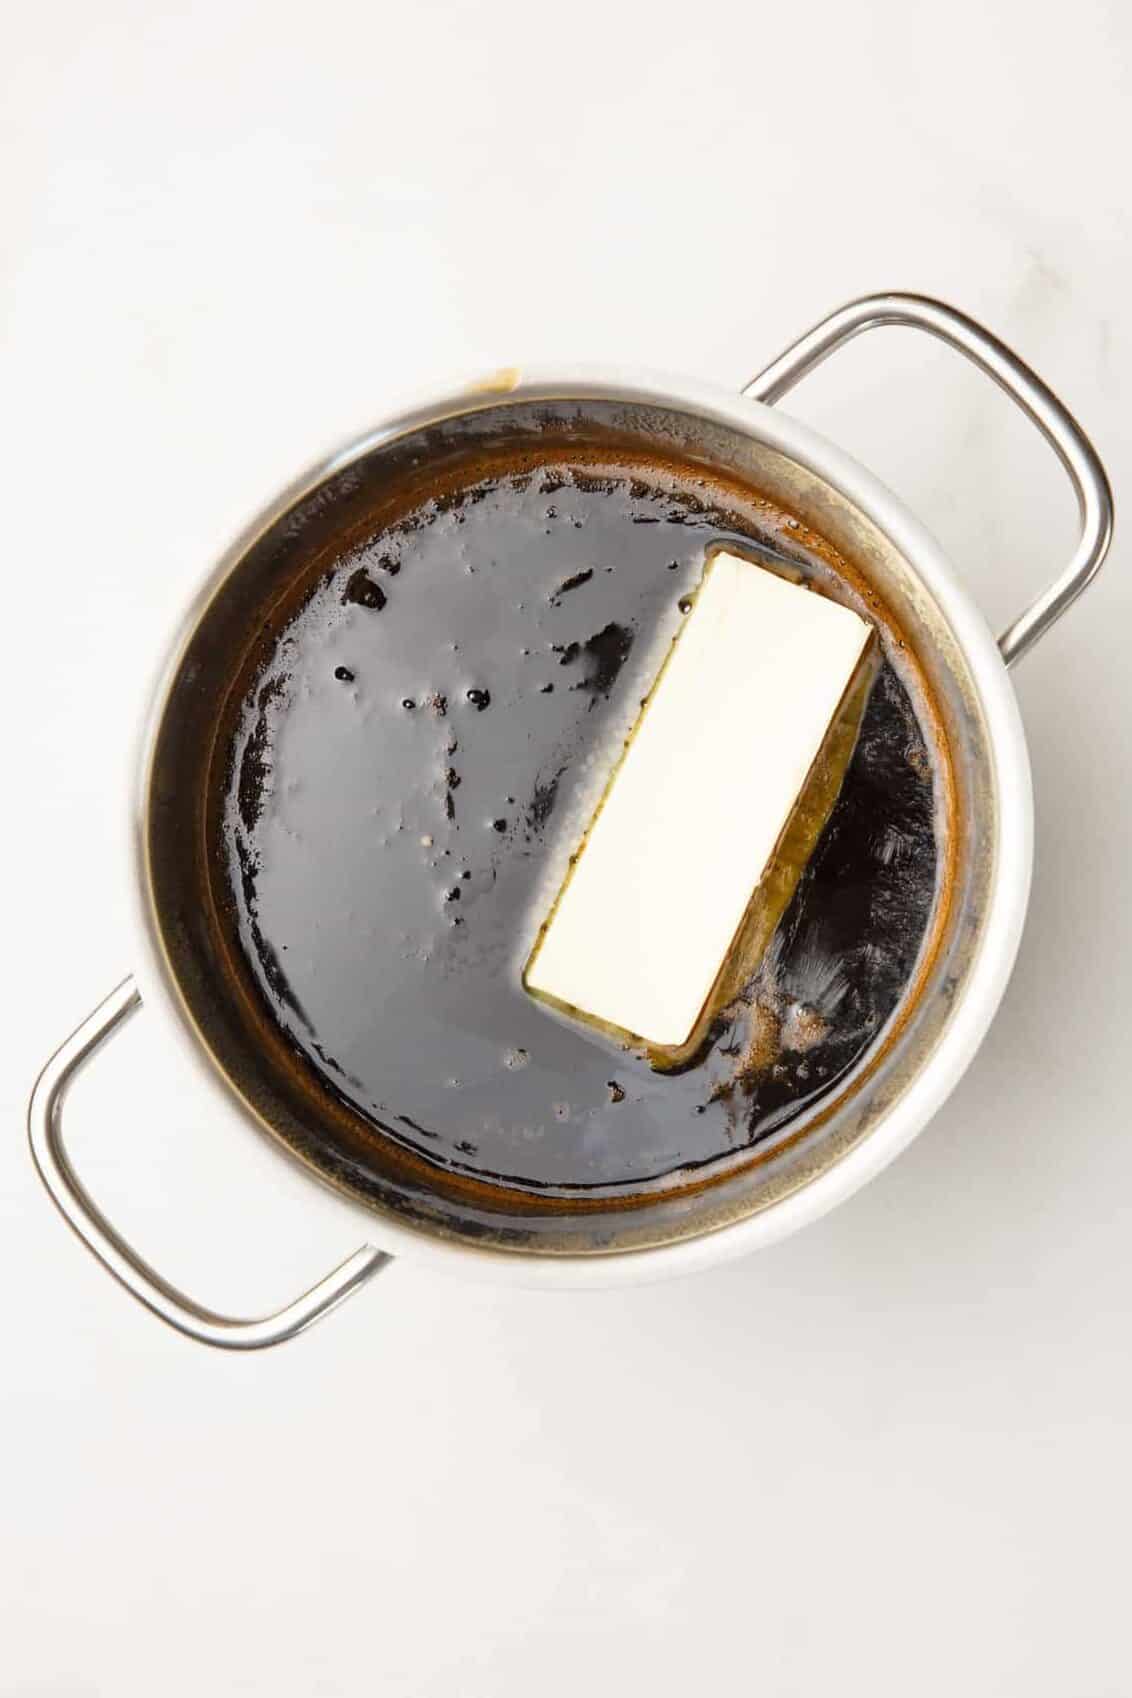 pancake syrup in a stainless steel sauce pan with a stick of butter